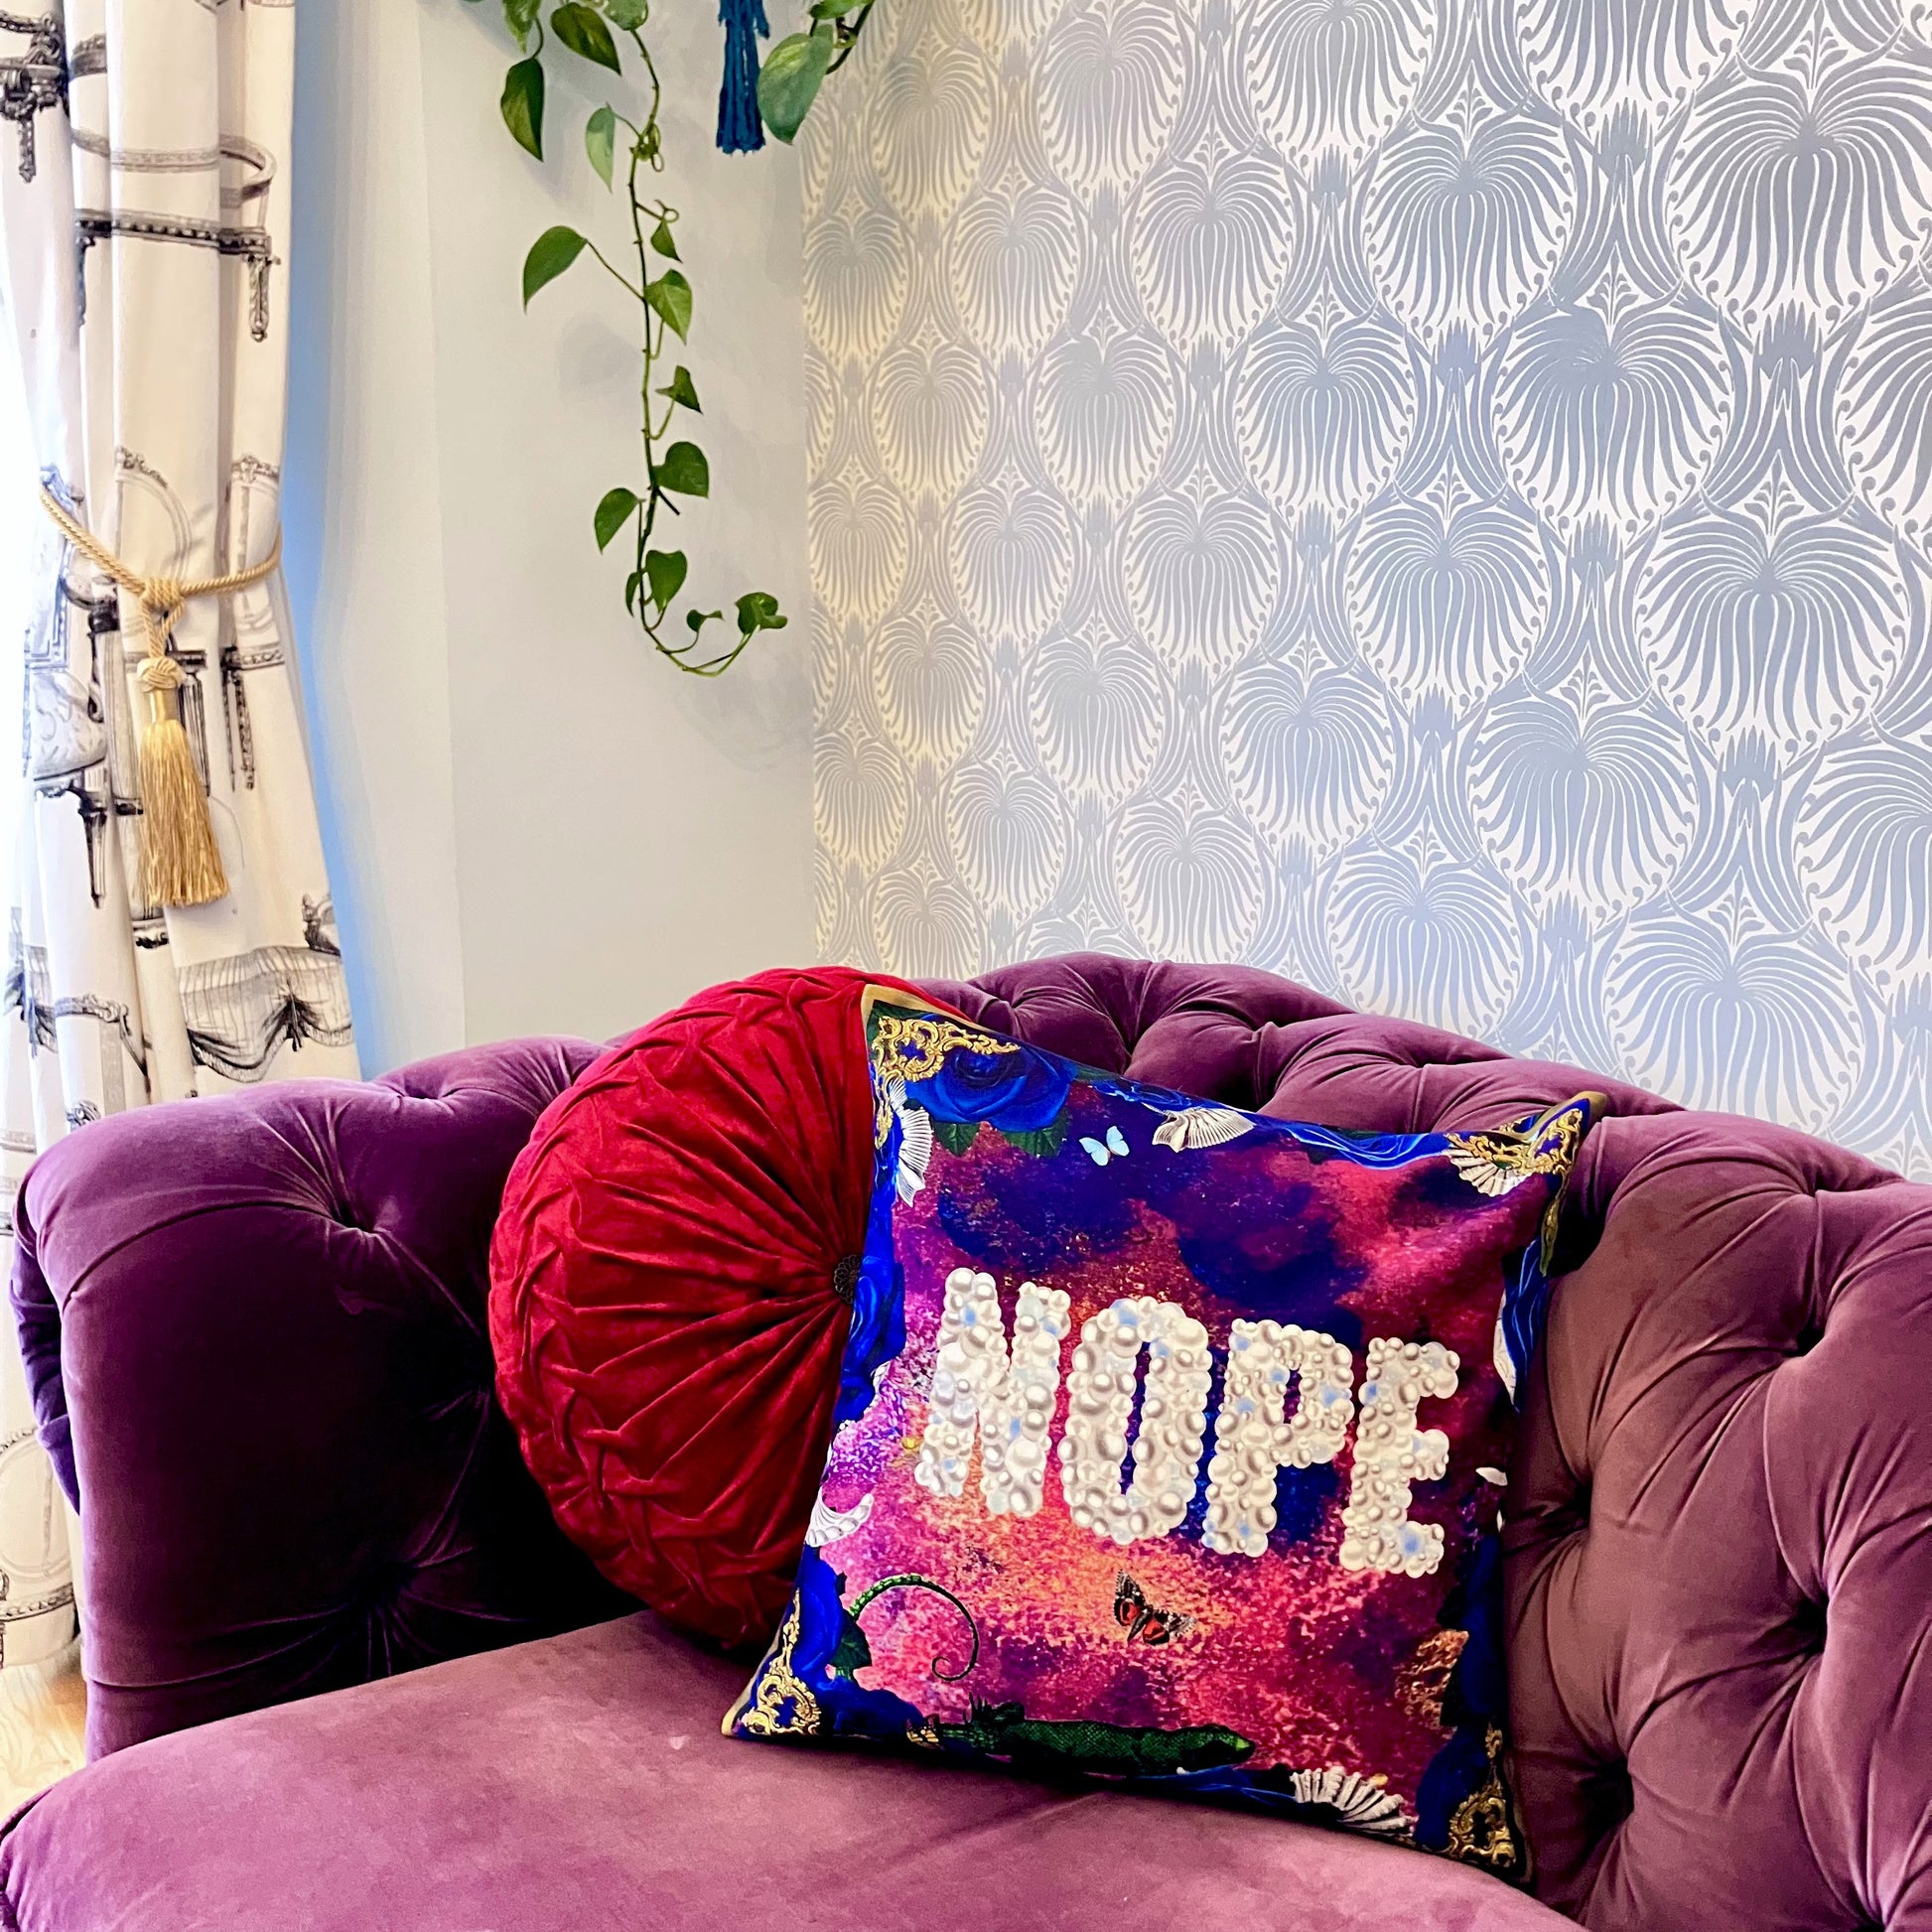 "Nope" Cushion Cover by House of Frisson. Featuring the word "Nope" written with pearls, framed by blue roses, and shells, against a blue and purple background. Showing cushion on a sofa in a room.